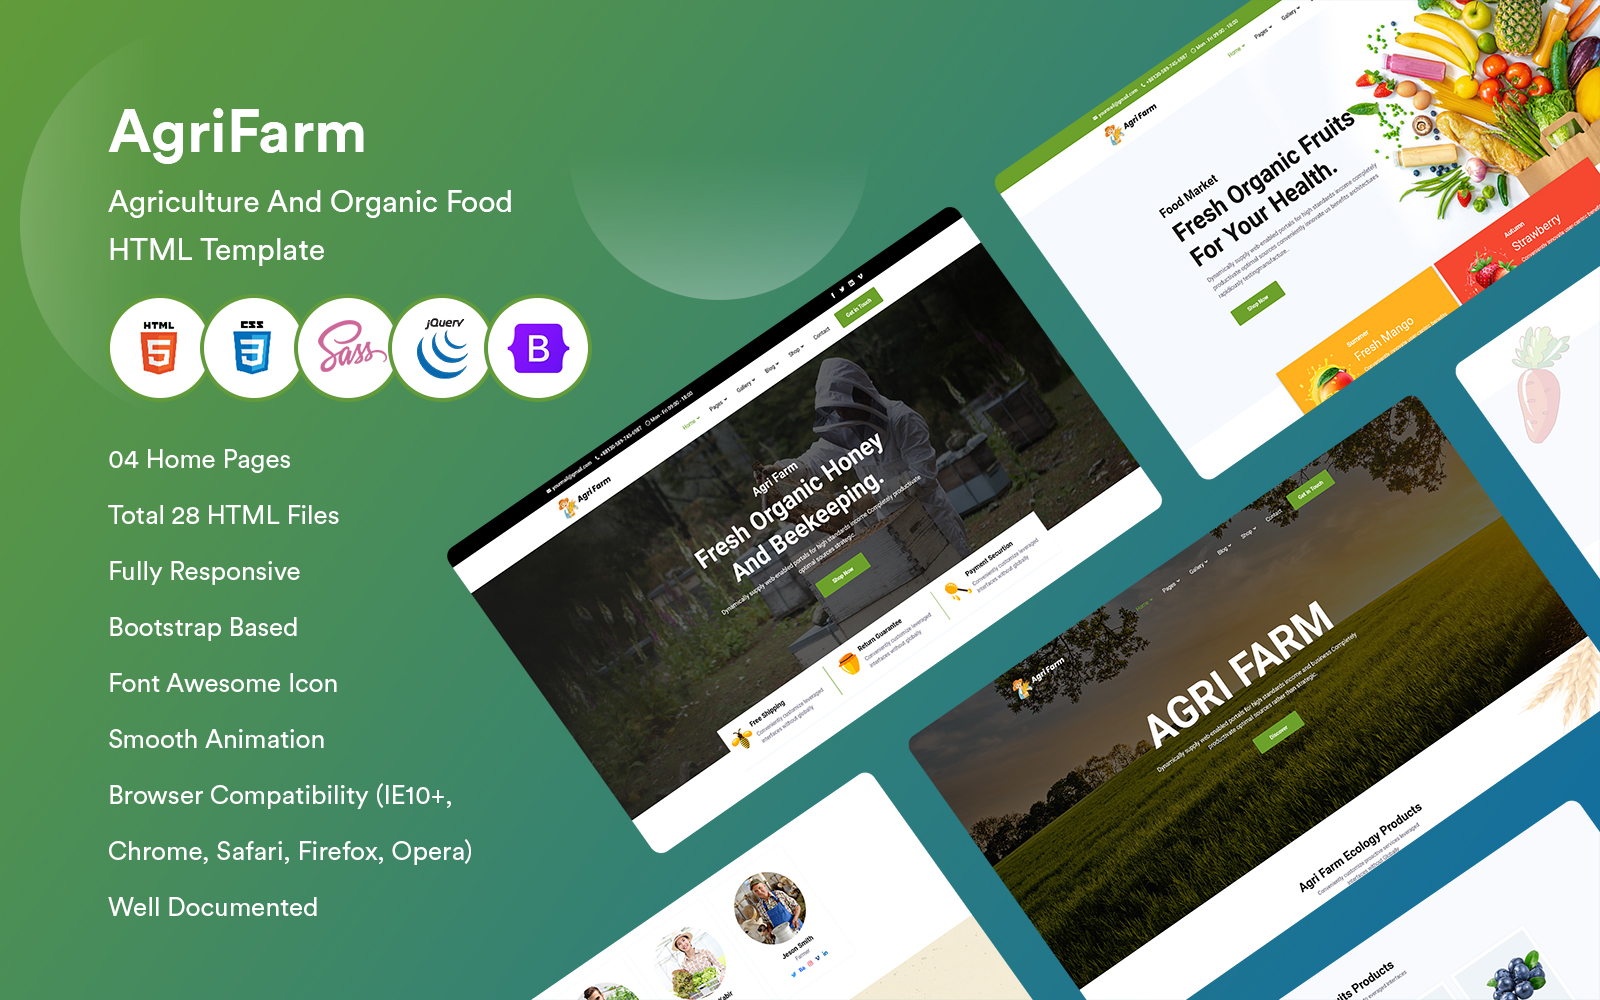 AgriFarm - Agriculture And Organic Food  HTML Template